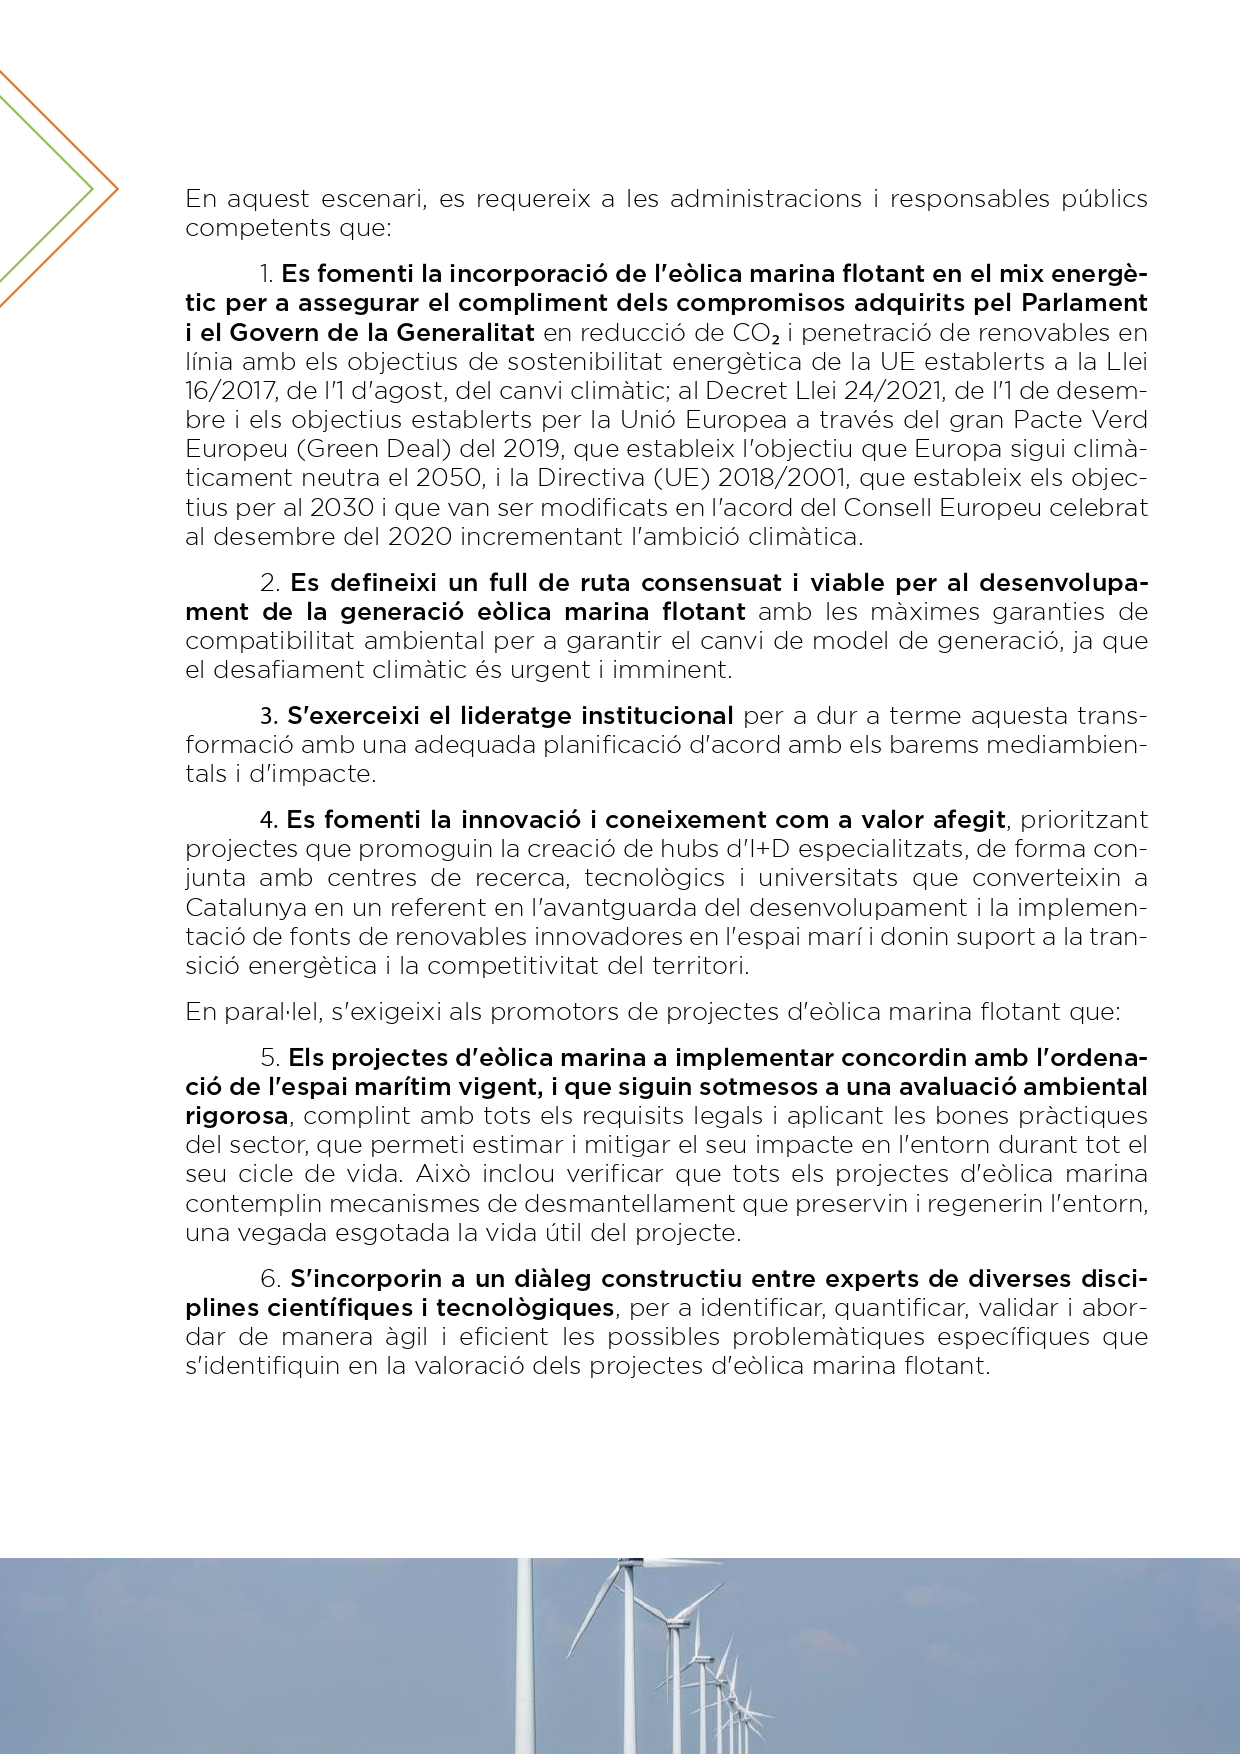 Manifiesto_IREC_CAT_v1_compressed_page-0004.jpg